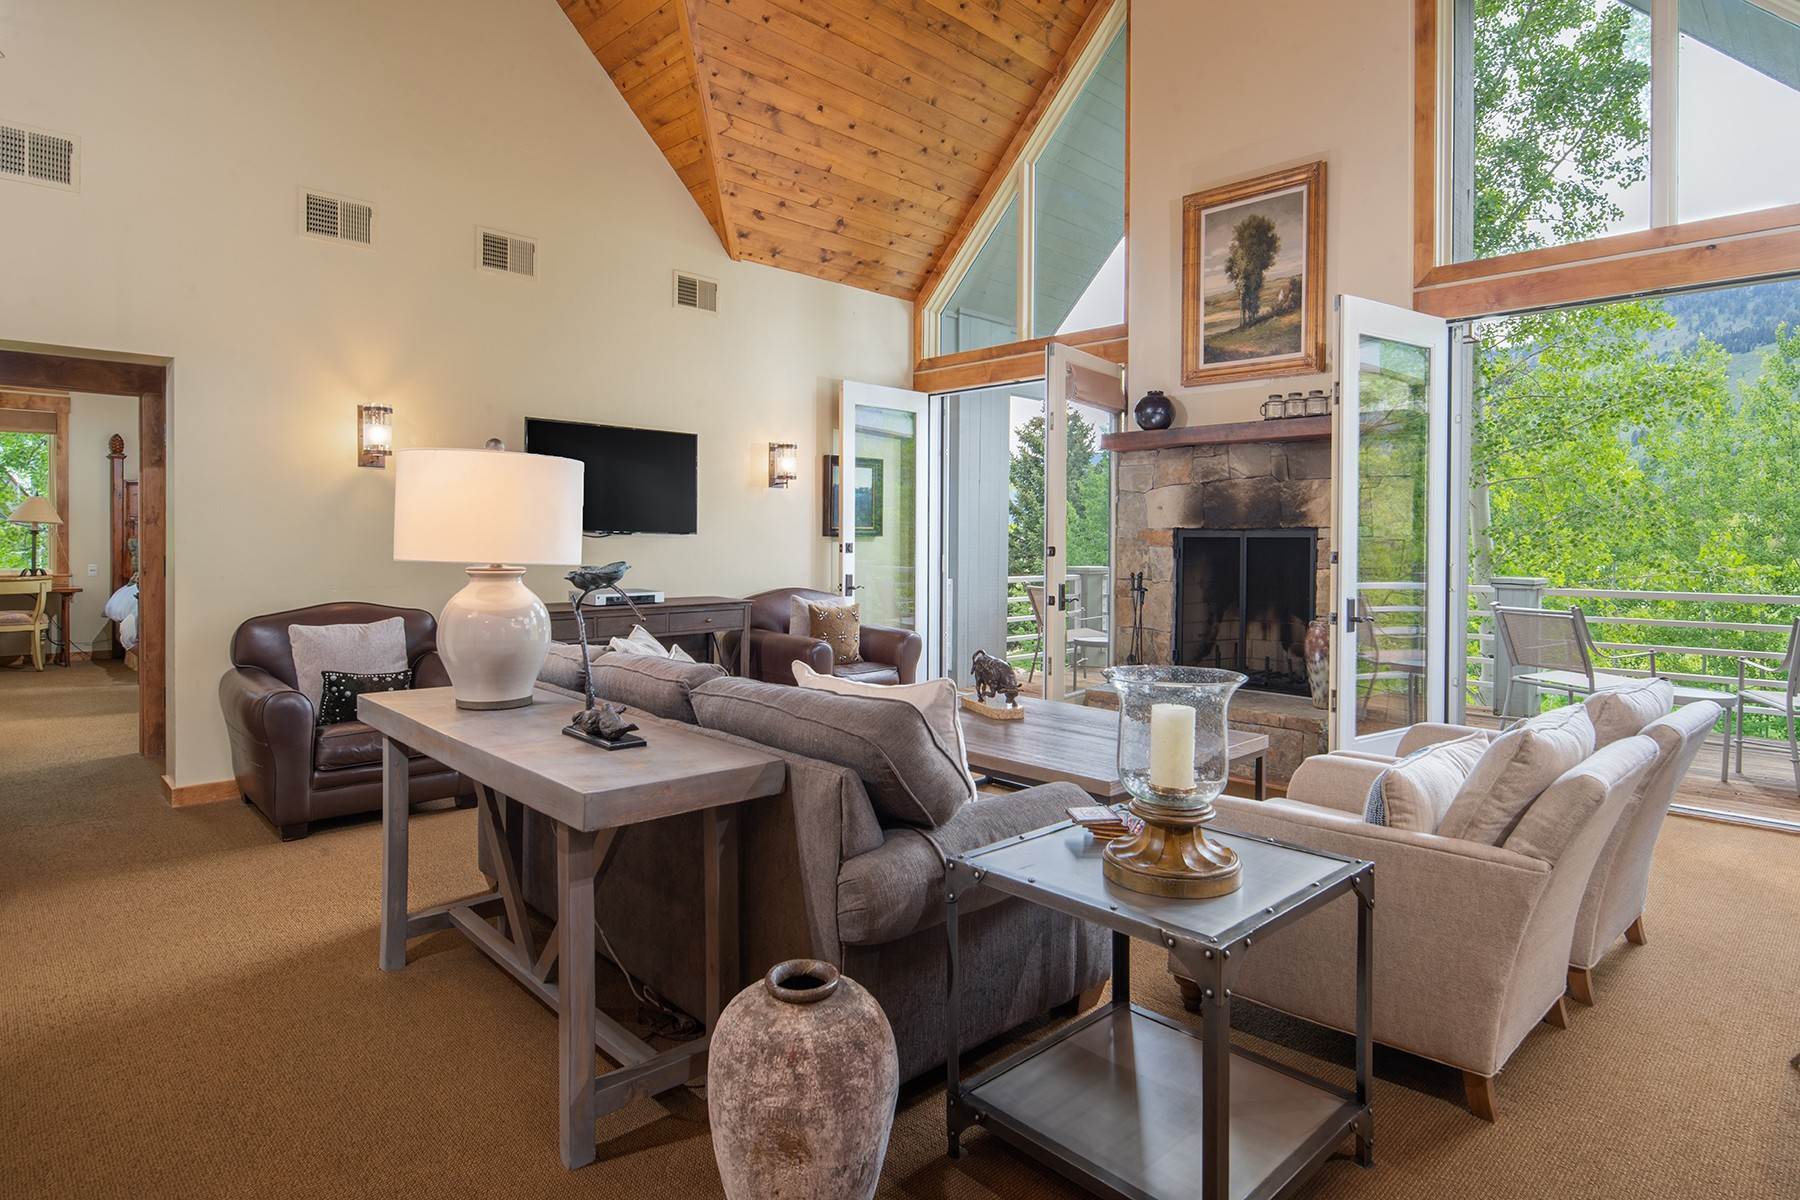 Fractional Ownership Property for Sale at Teton Pines Residence Club 3466 N Clubhouse Drive Wilson, Wyoming 83014 United States